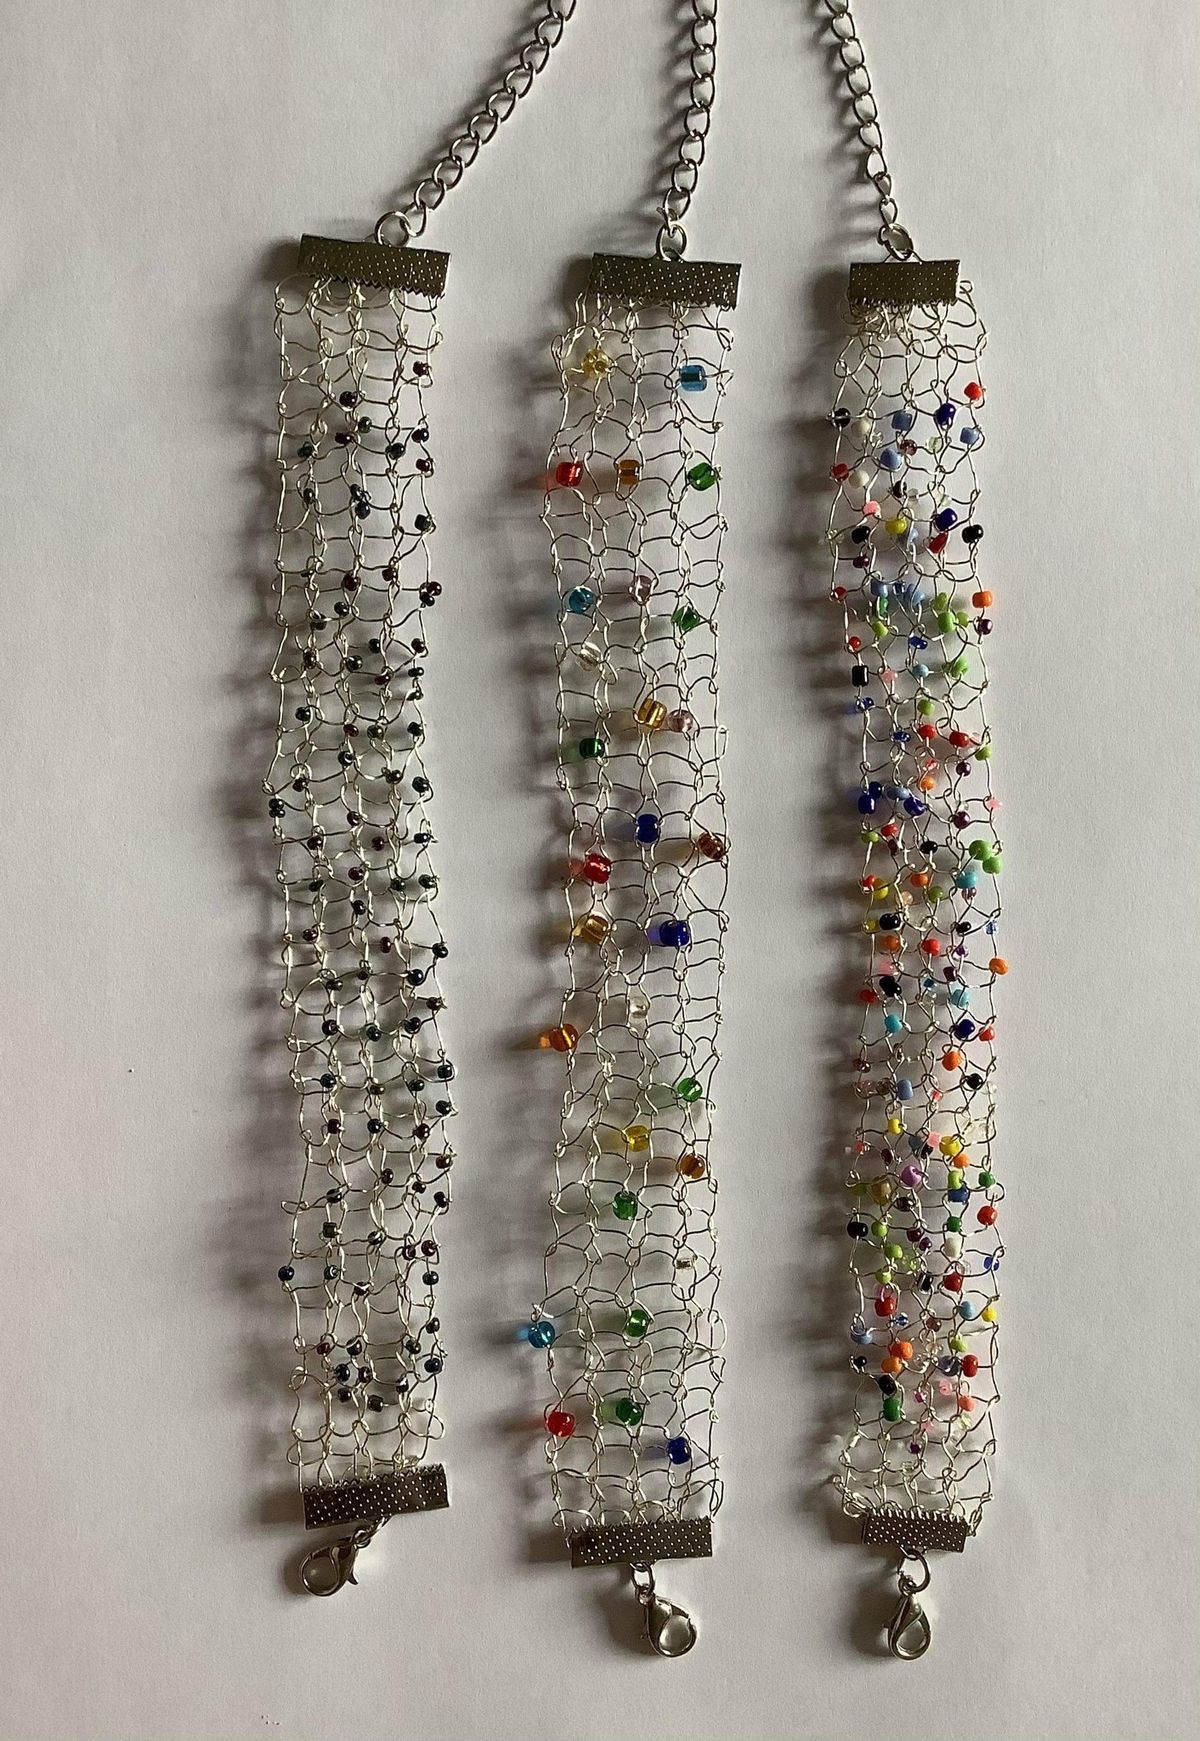 Knitted Wire Bracelet Workshop with Beaded Wirecrafts